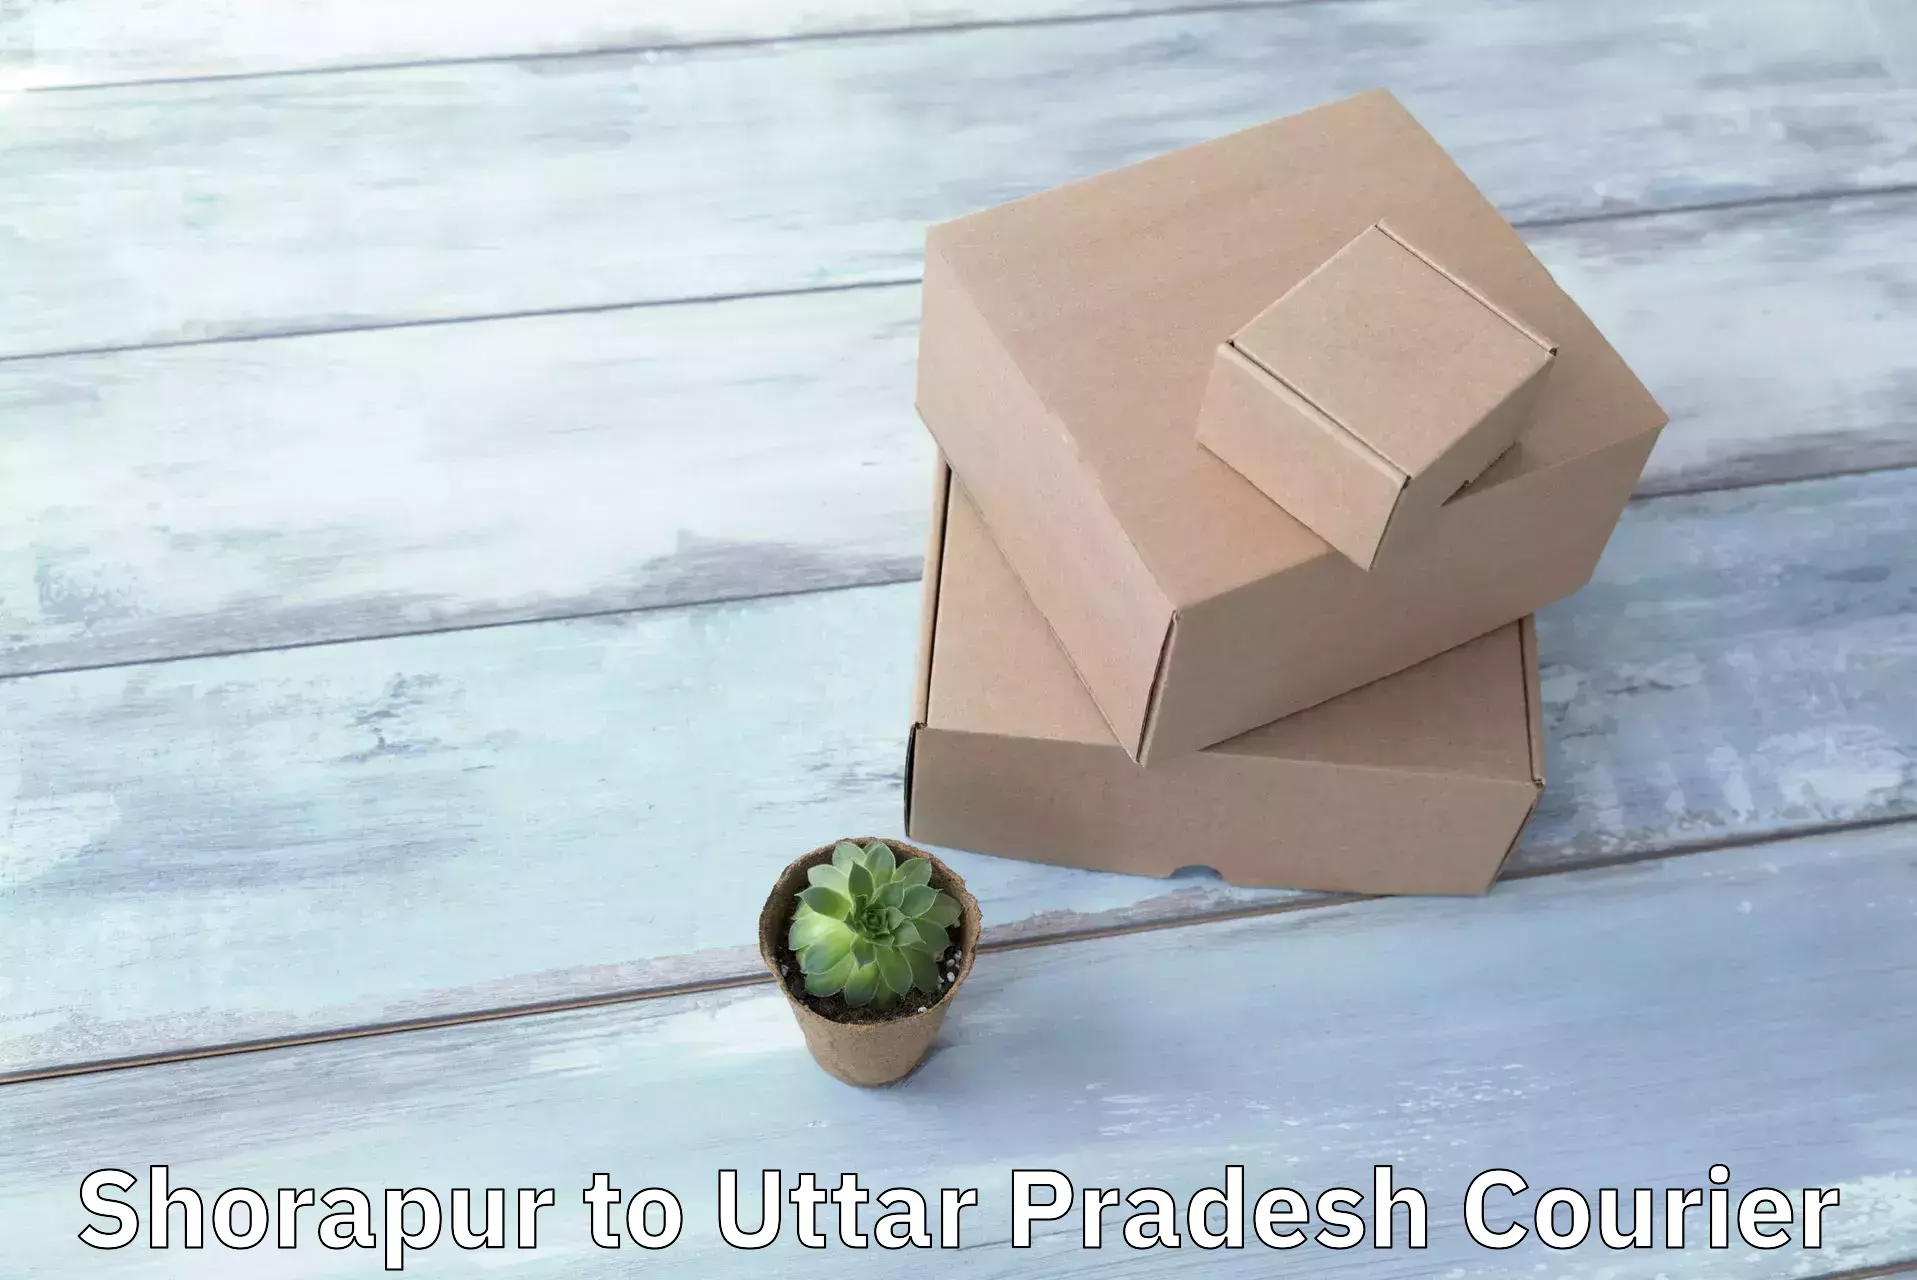 Courier insurance Shorapur to IIT Kanpur